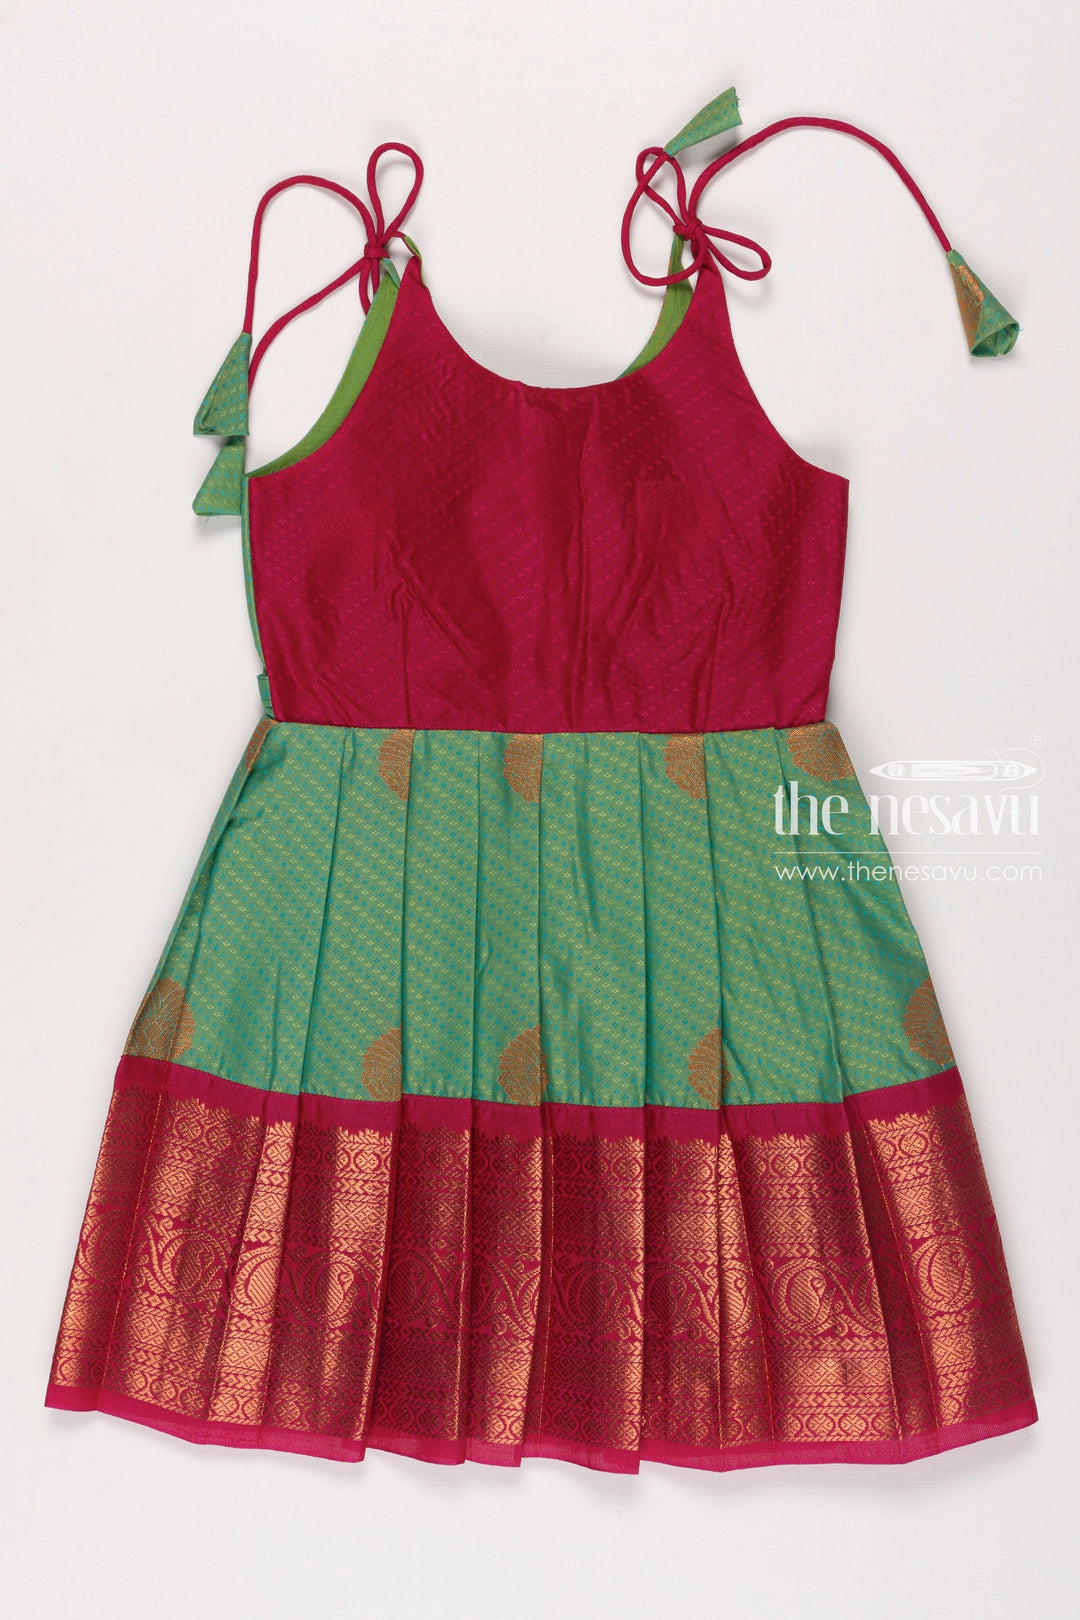 The Nesavu Tie-up Frock Vibrant TieUp Silk Frock for Girls  Contrast Magenta and Green with Traditional Patterns Nesavu 14 (6M) / Green / Style 3 T303C-14 Girls Magenta Green Silk Frock | Festive Tie Up Design | Traditional Chic Attire | The Nesavu